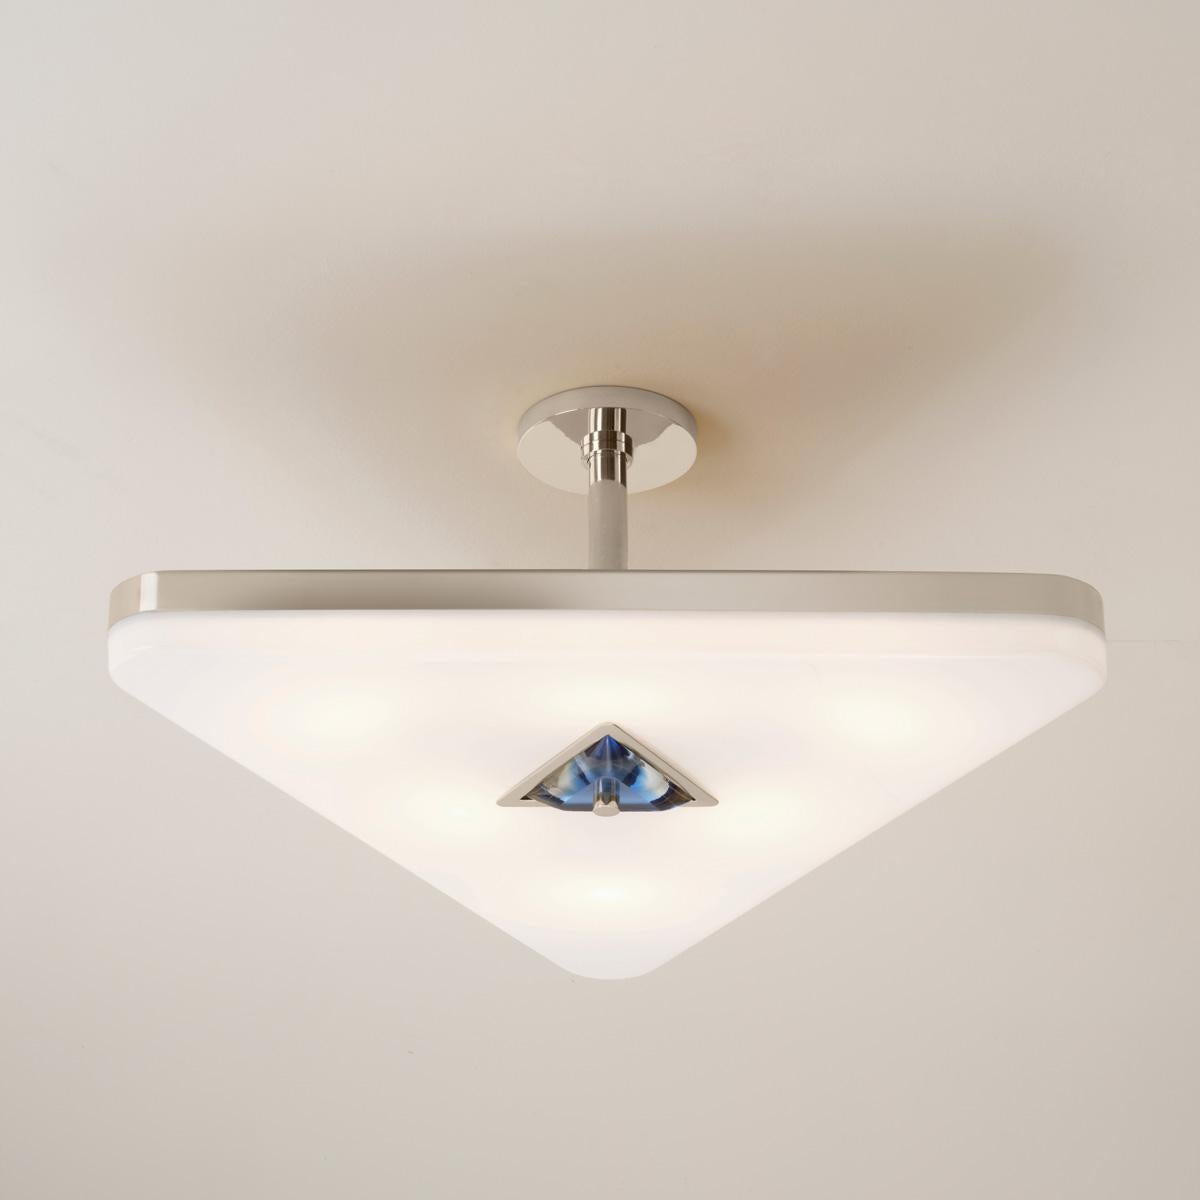 The Iris Triangle ceiling light is designed around an expansive acrylic shade with a hand carved glass center reminiscent of a gemstone. This versatile fixture can be installed as a pendant on a stem or as a flush mount. Can be used with the Iris